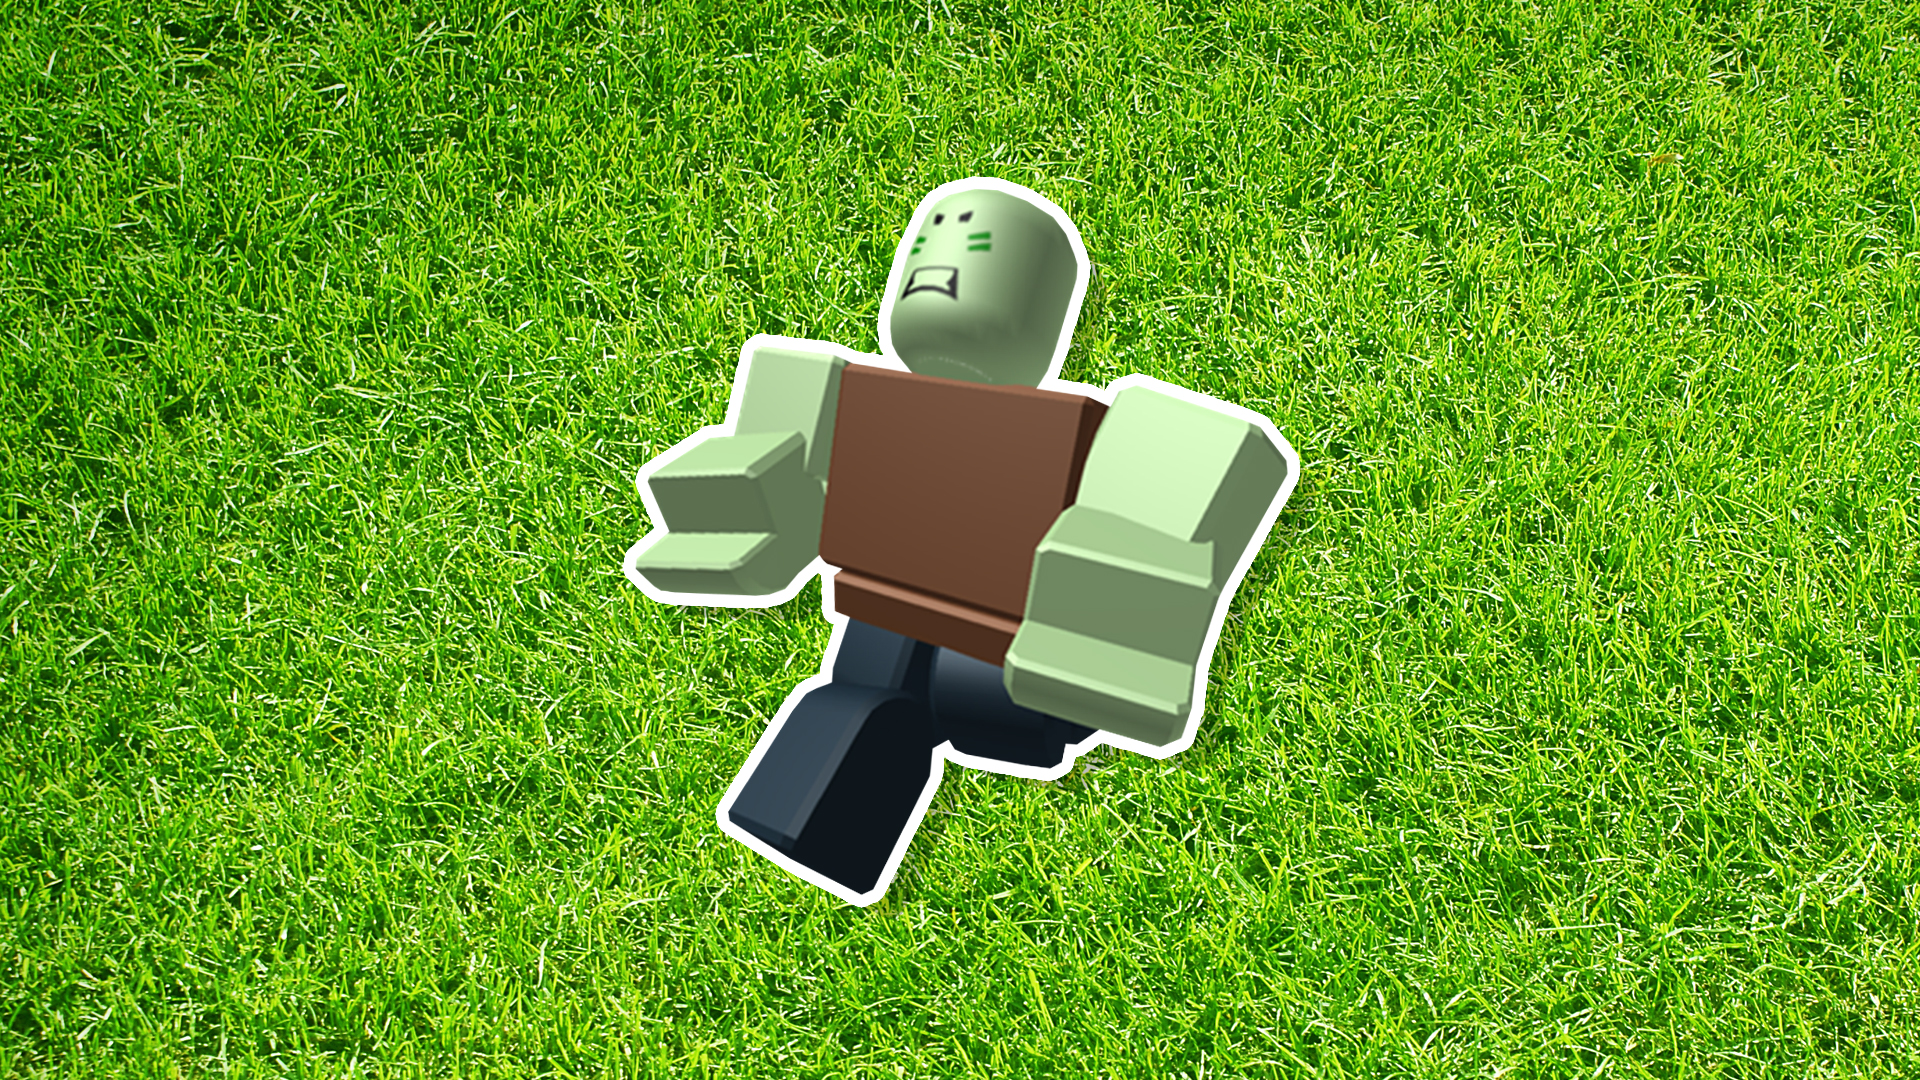 A Roblox Zombie game